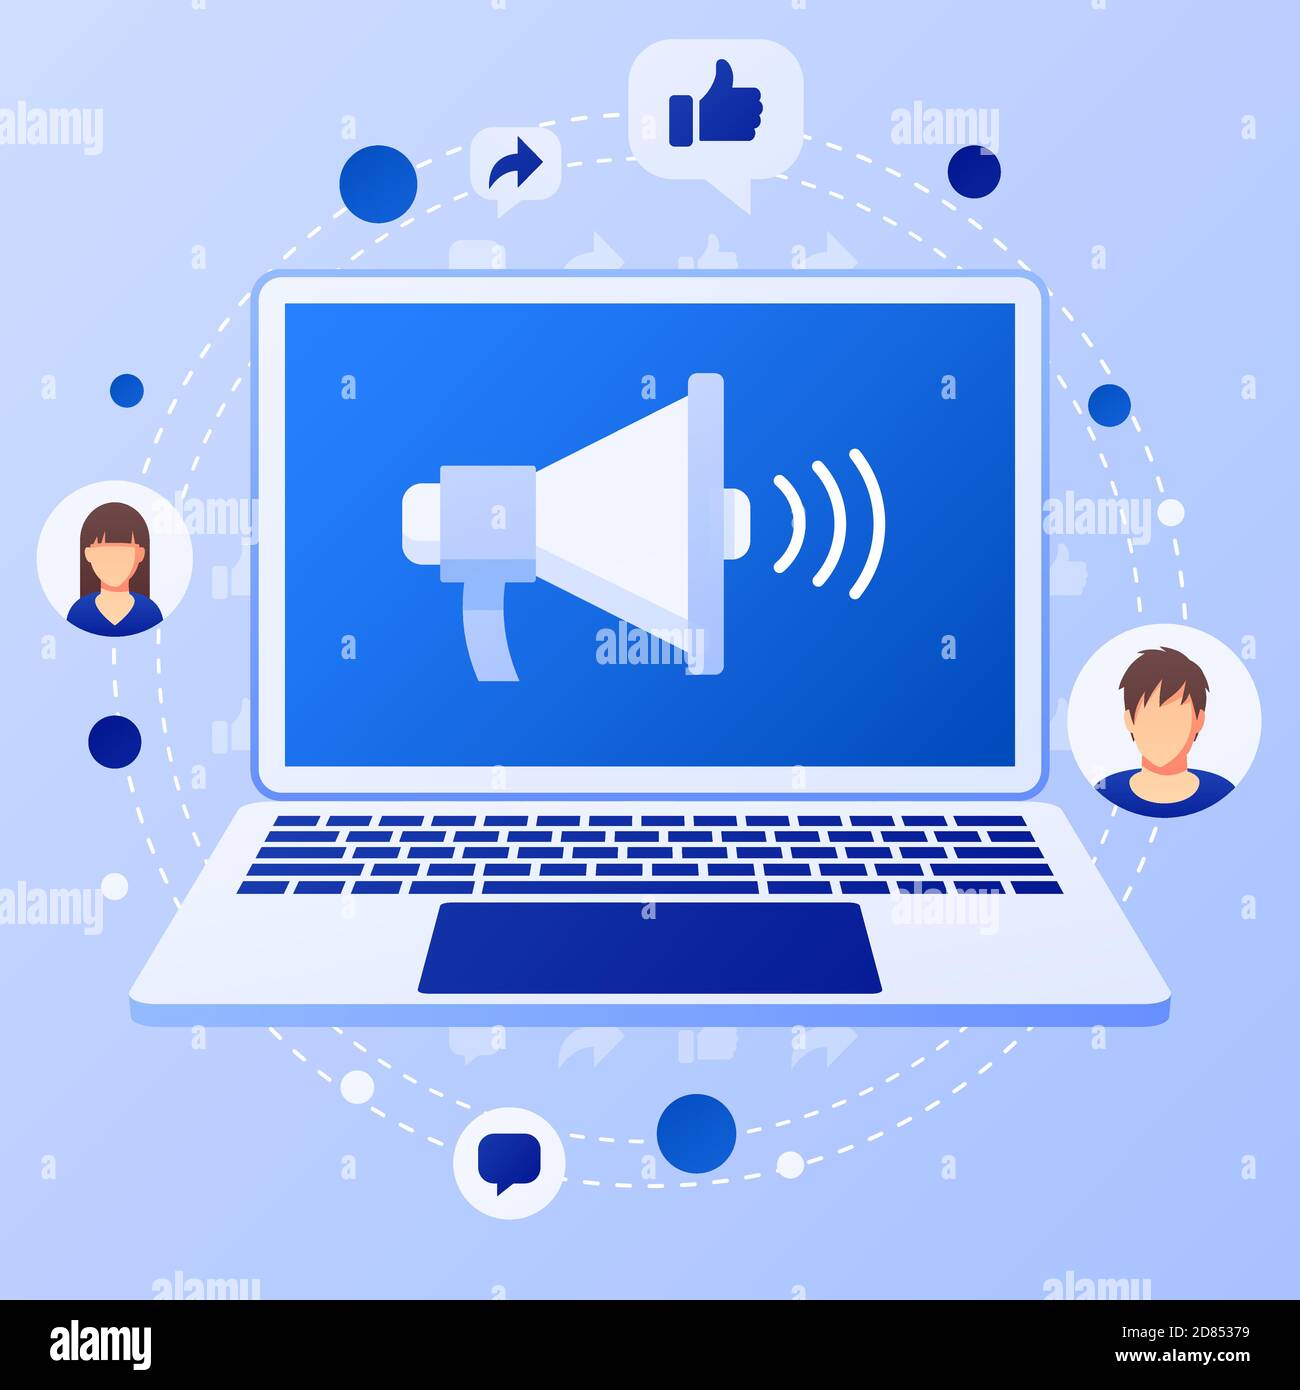 Social media marketing concept with megaphone. Public relations advertising. Flat style design with gradient. Modern vector. Stock Vector